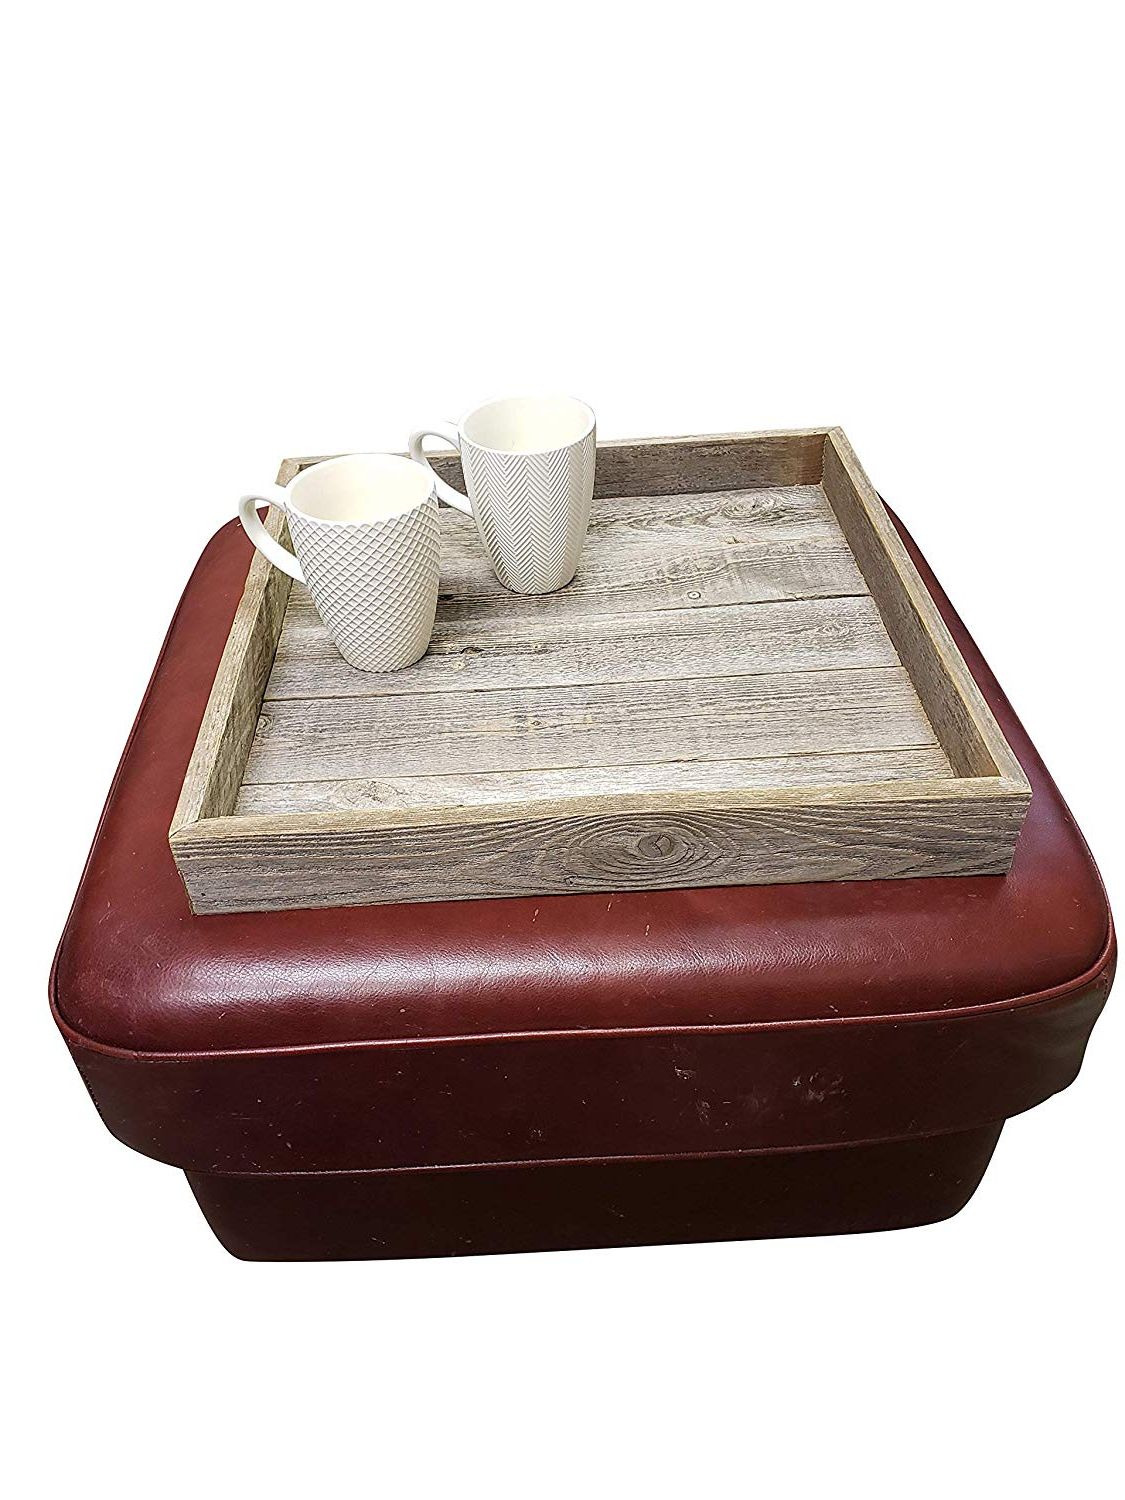 Ottoman Tray Made With Rustic Reclaimed Wood – Large Square Design For Inside Famous Weathered Wood Ottomans (View 3 of 10)